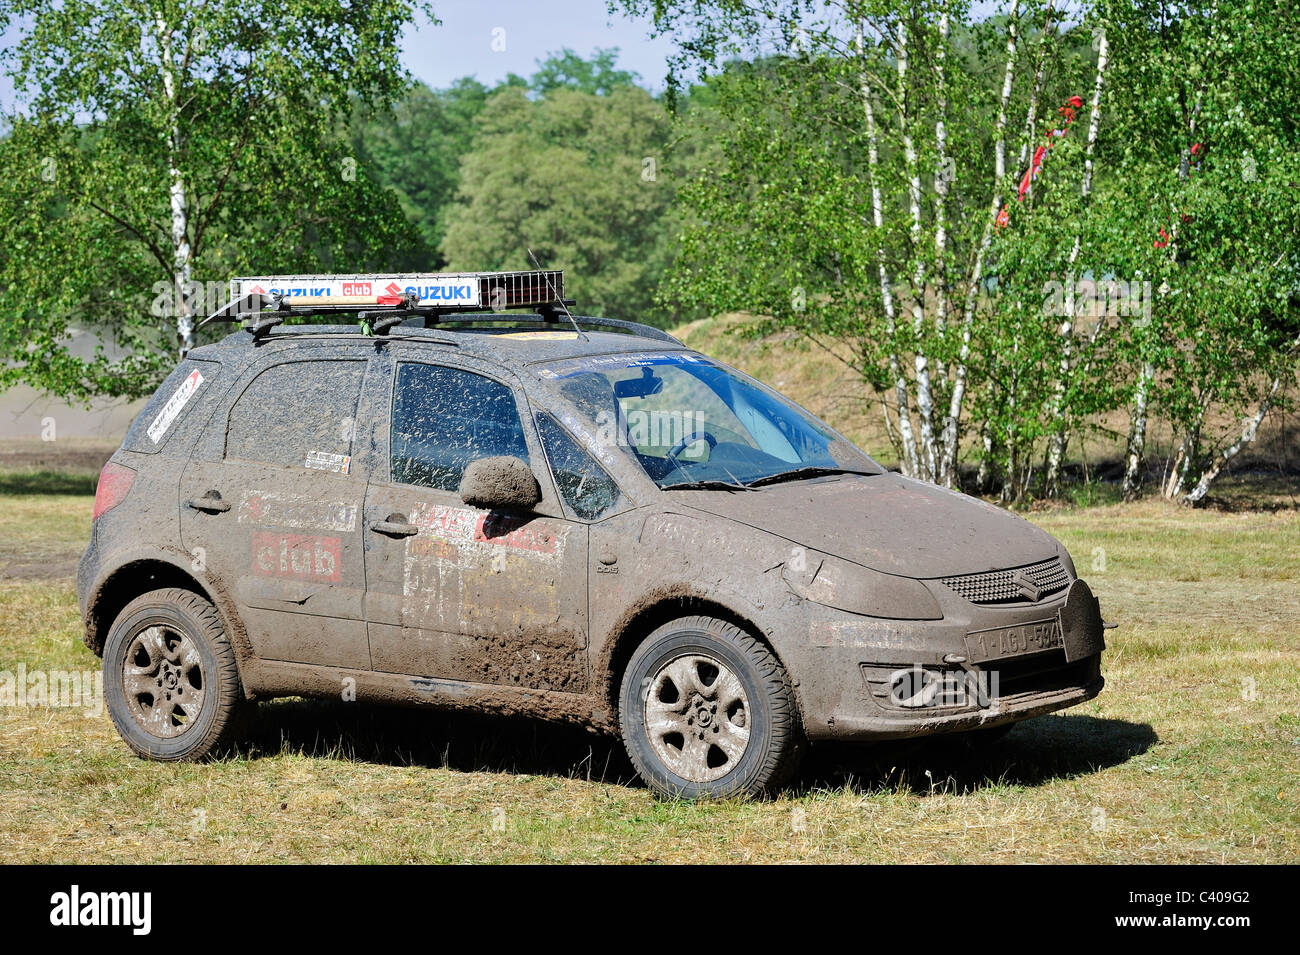 Suzuki SX4 four-wheel drive off-road vehicle covered in mud after rally cross-country racing Stock Photo